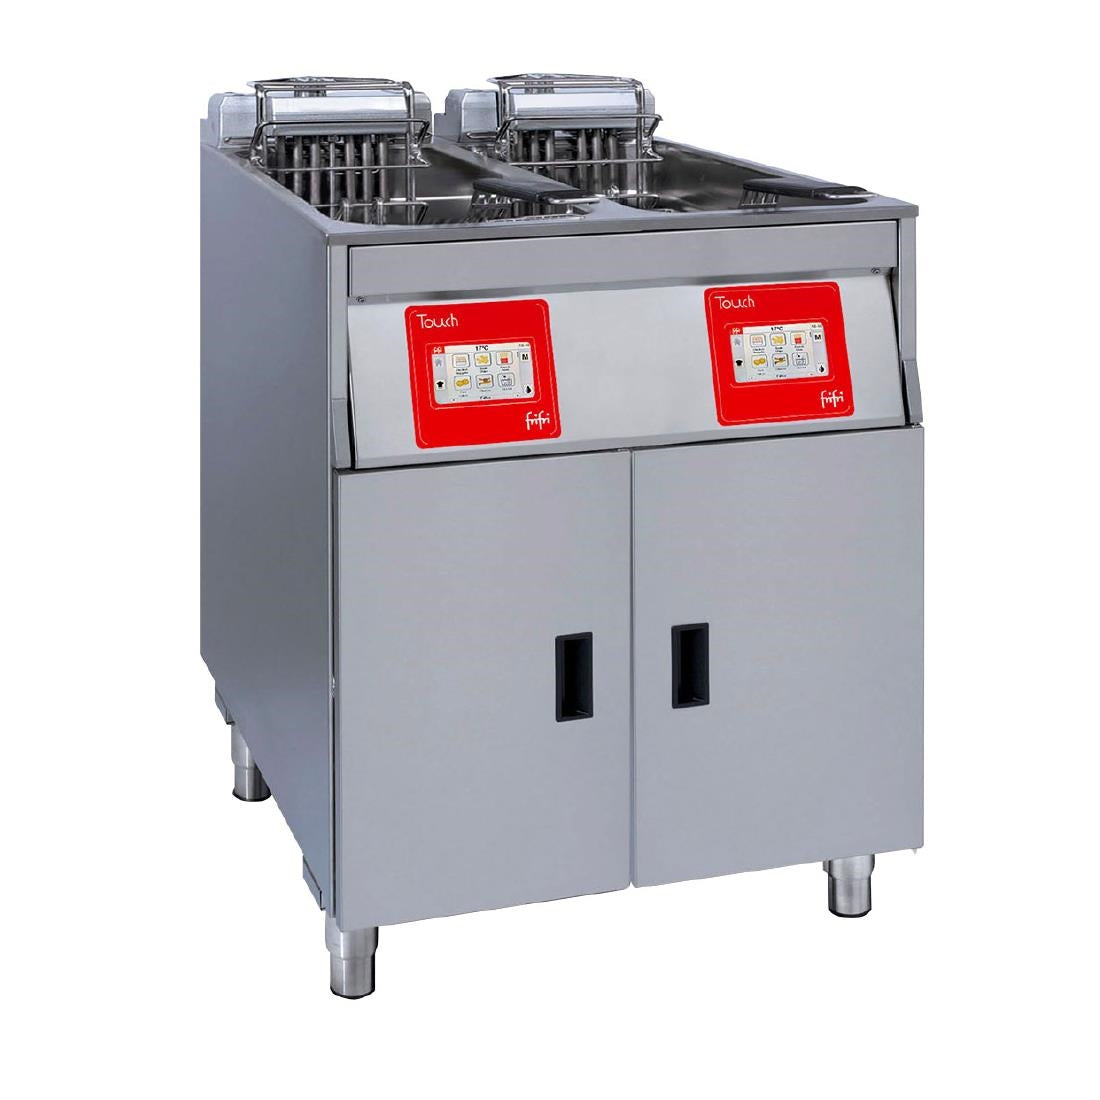 HS017-3PH FriFri Touch 622 Electric Free-standing Fryer Twin Tank Twin Baskets 2x11.4kW Three Phase TL622L31G0